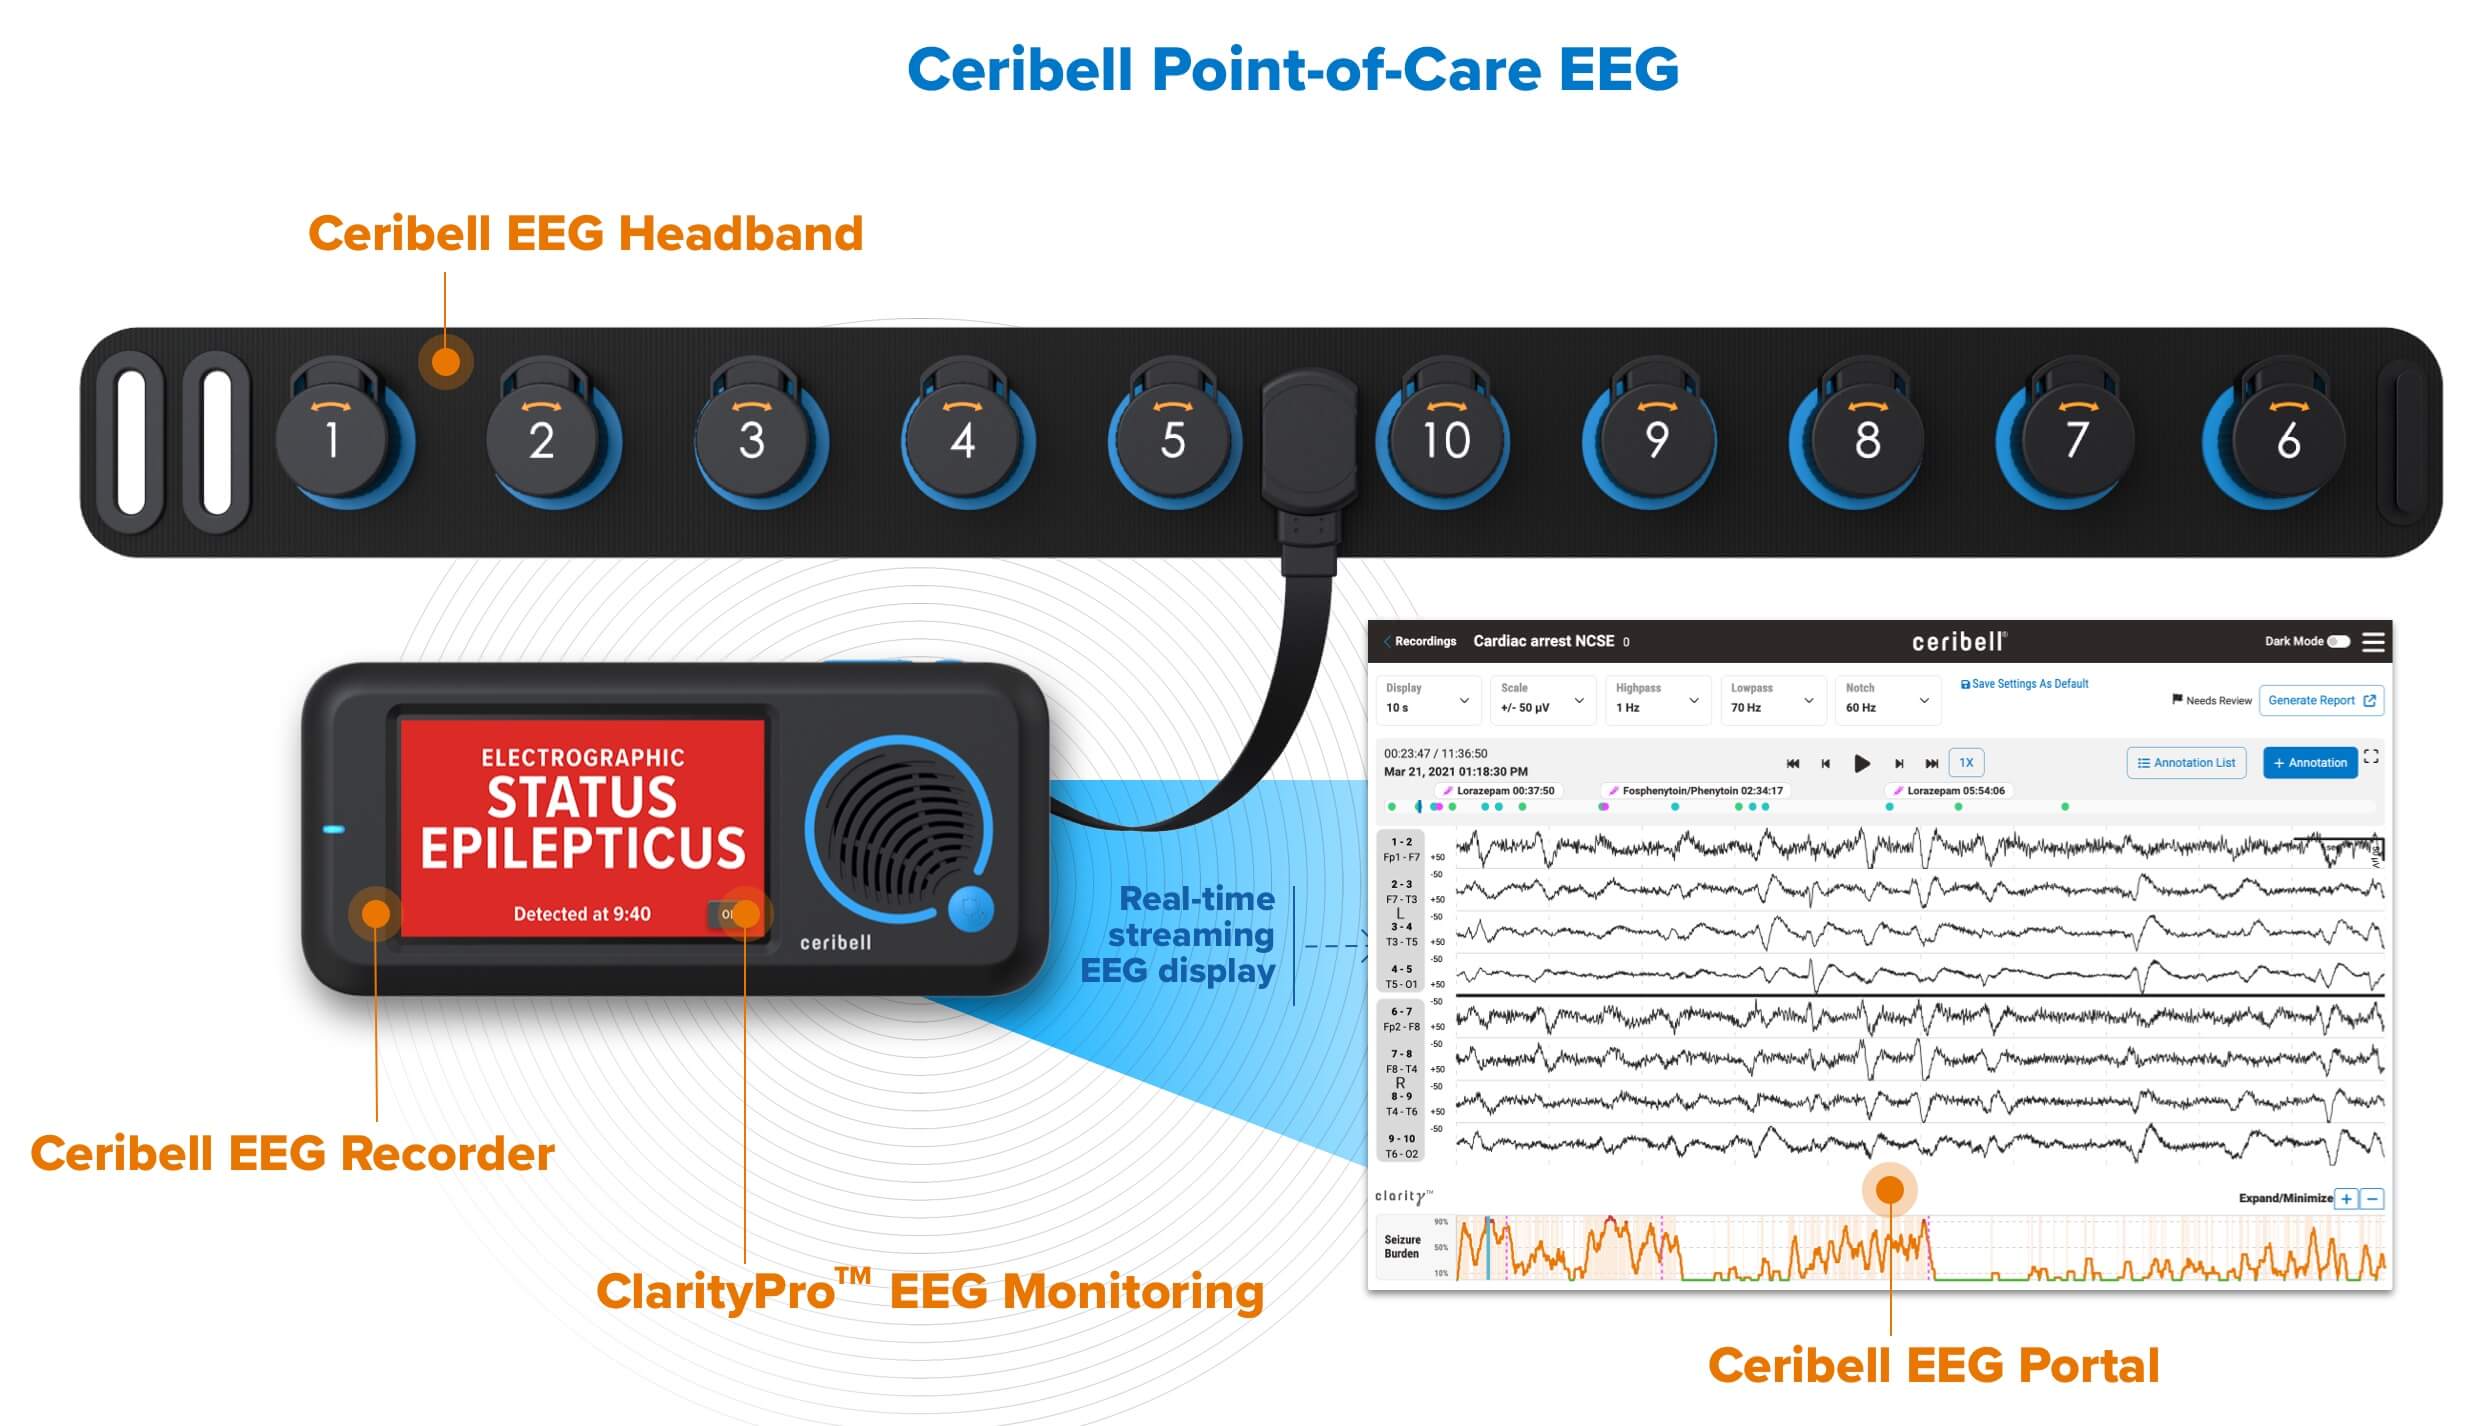 Ceribell brings power of AI to seizure management